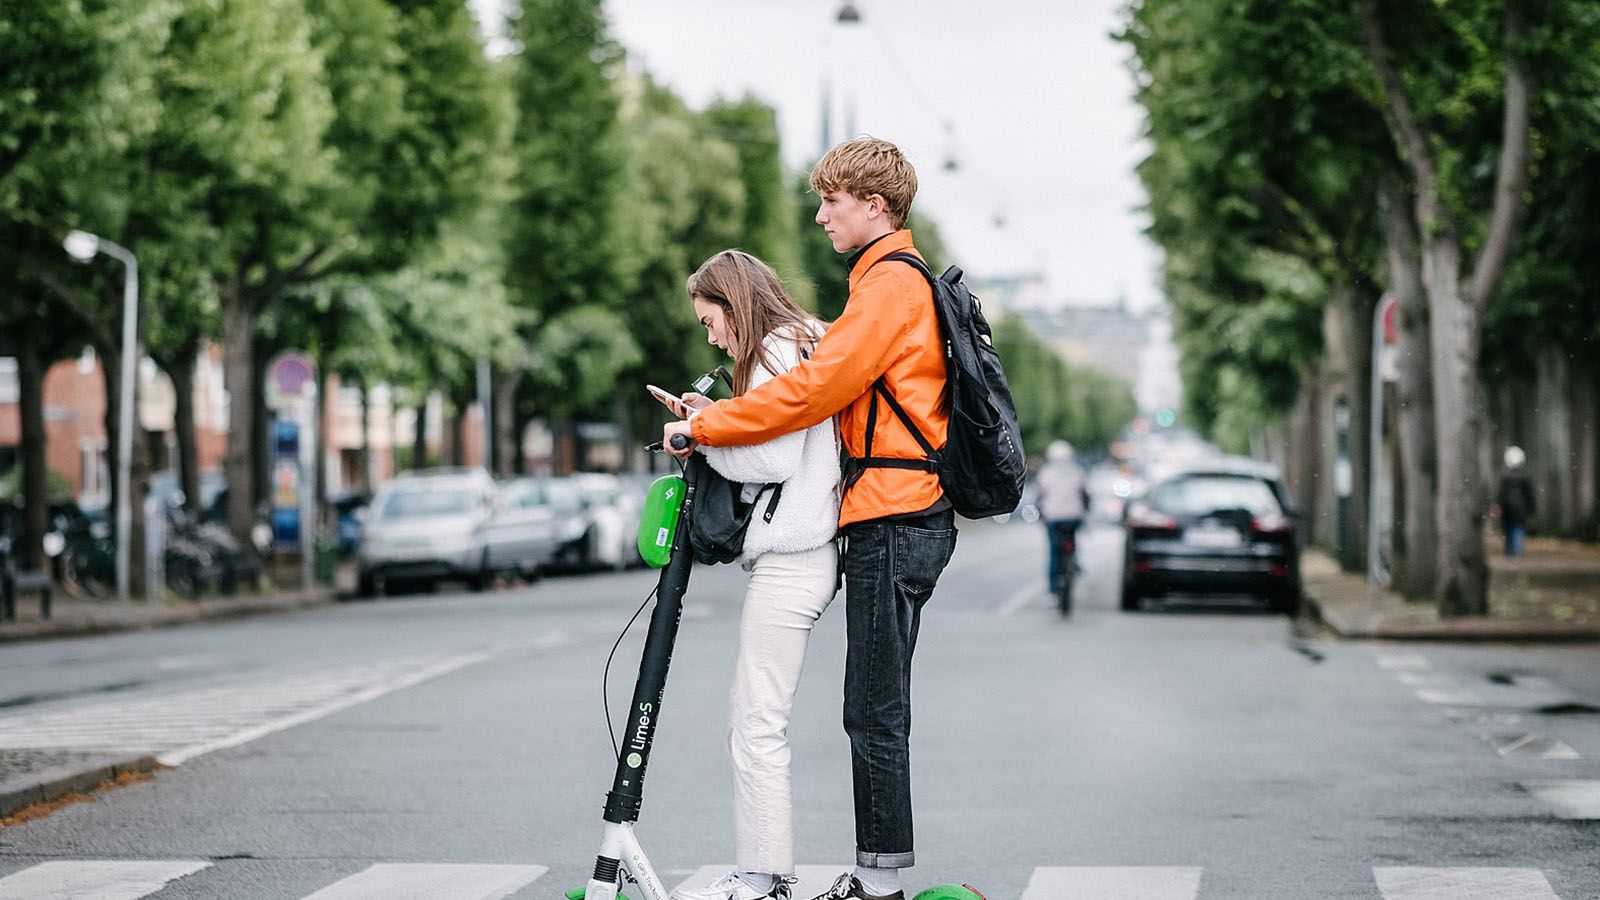 Two people riding a electric scooter